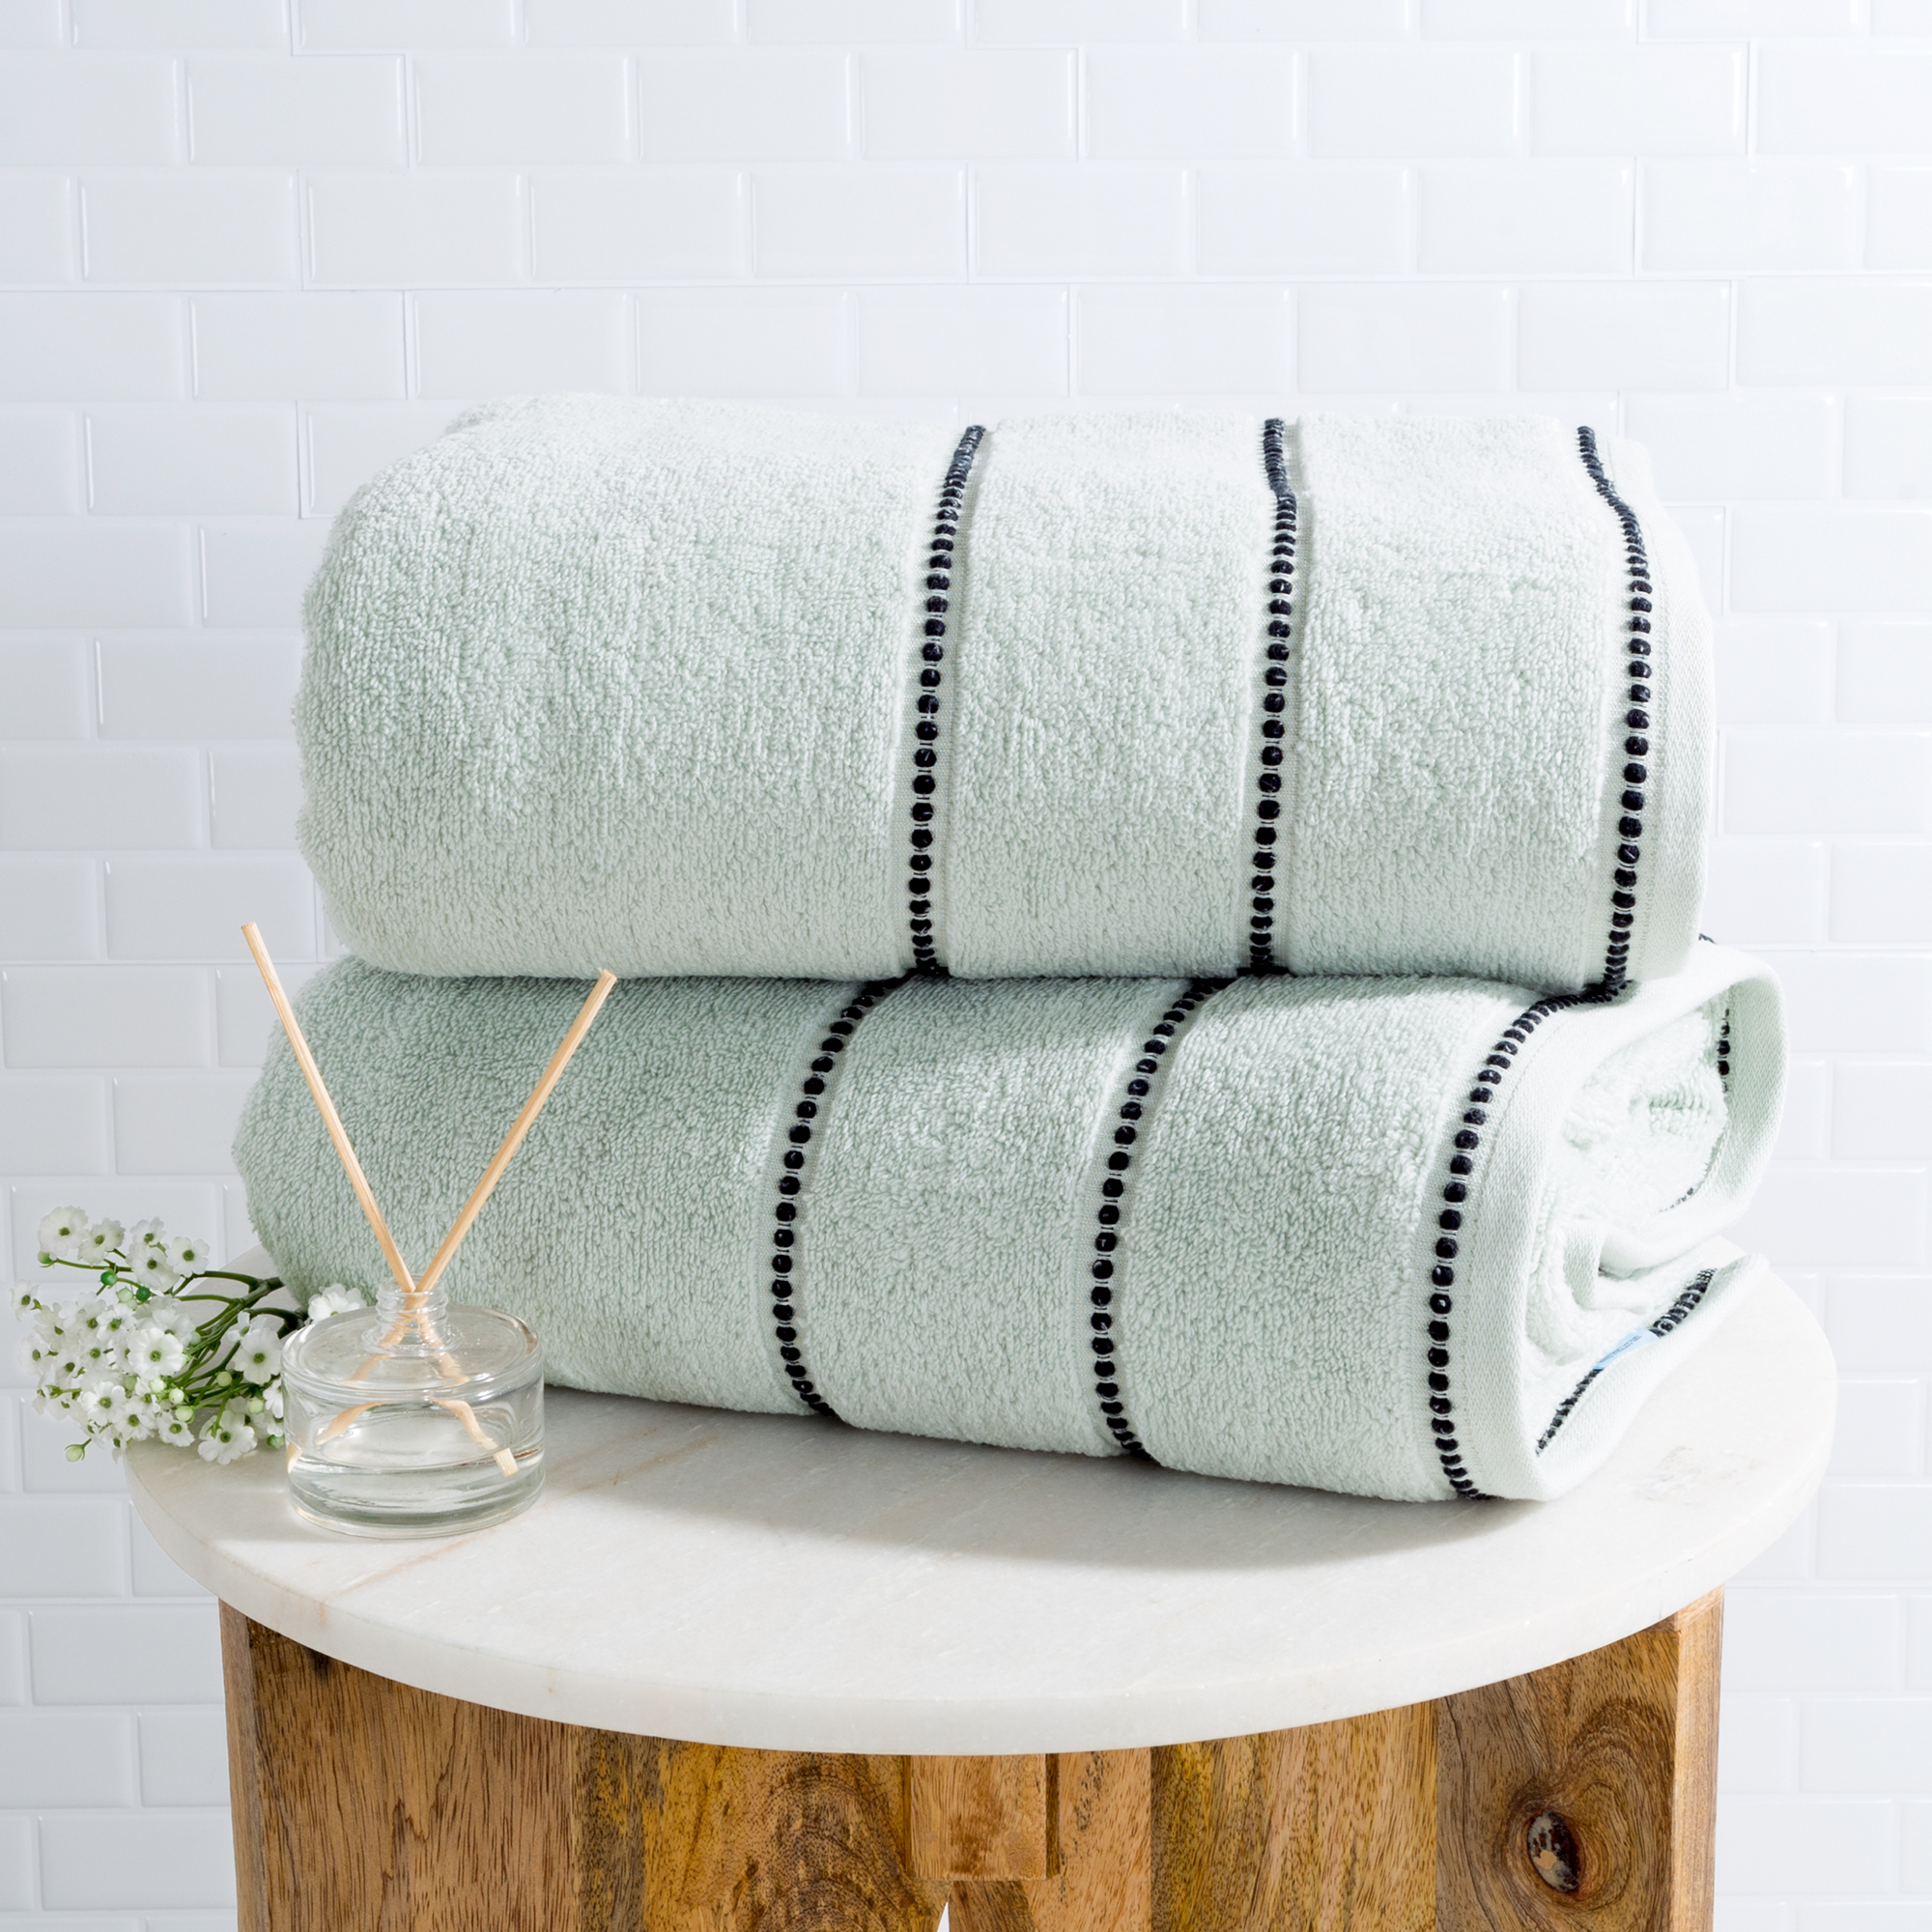 Luxurious Huge 34 X 68 In Cotton Towel Set- 2 Piece Bath Sheet Set Made From 100% Plush Cotton- Quick Dry, Soft And Absorbent Seafoam